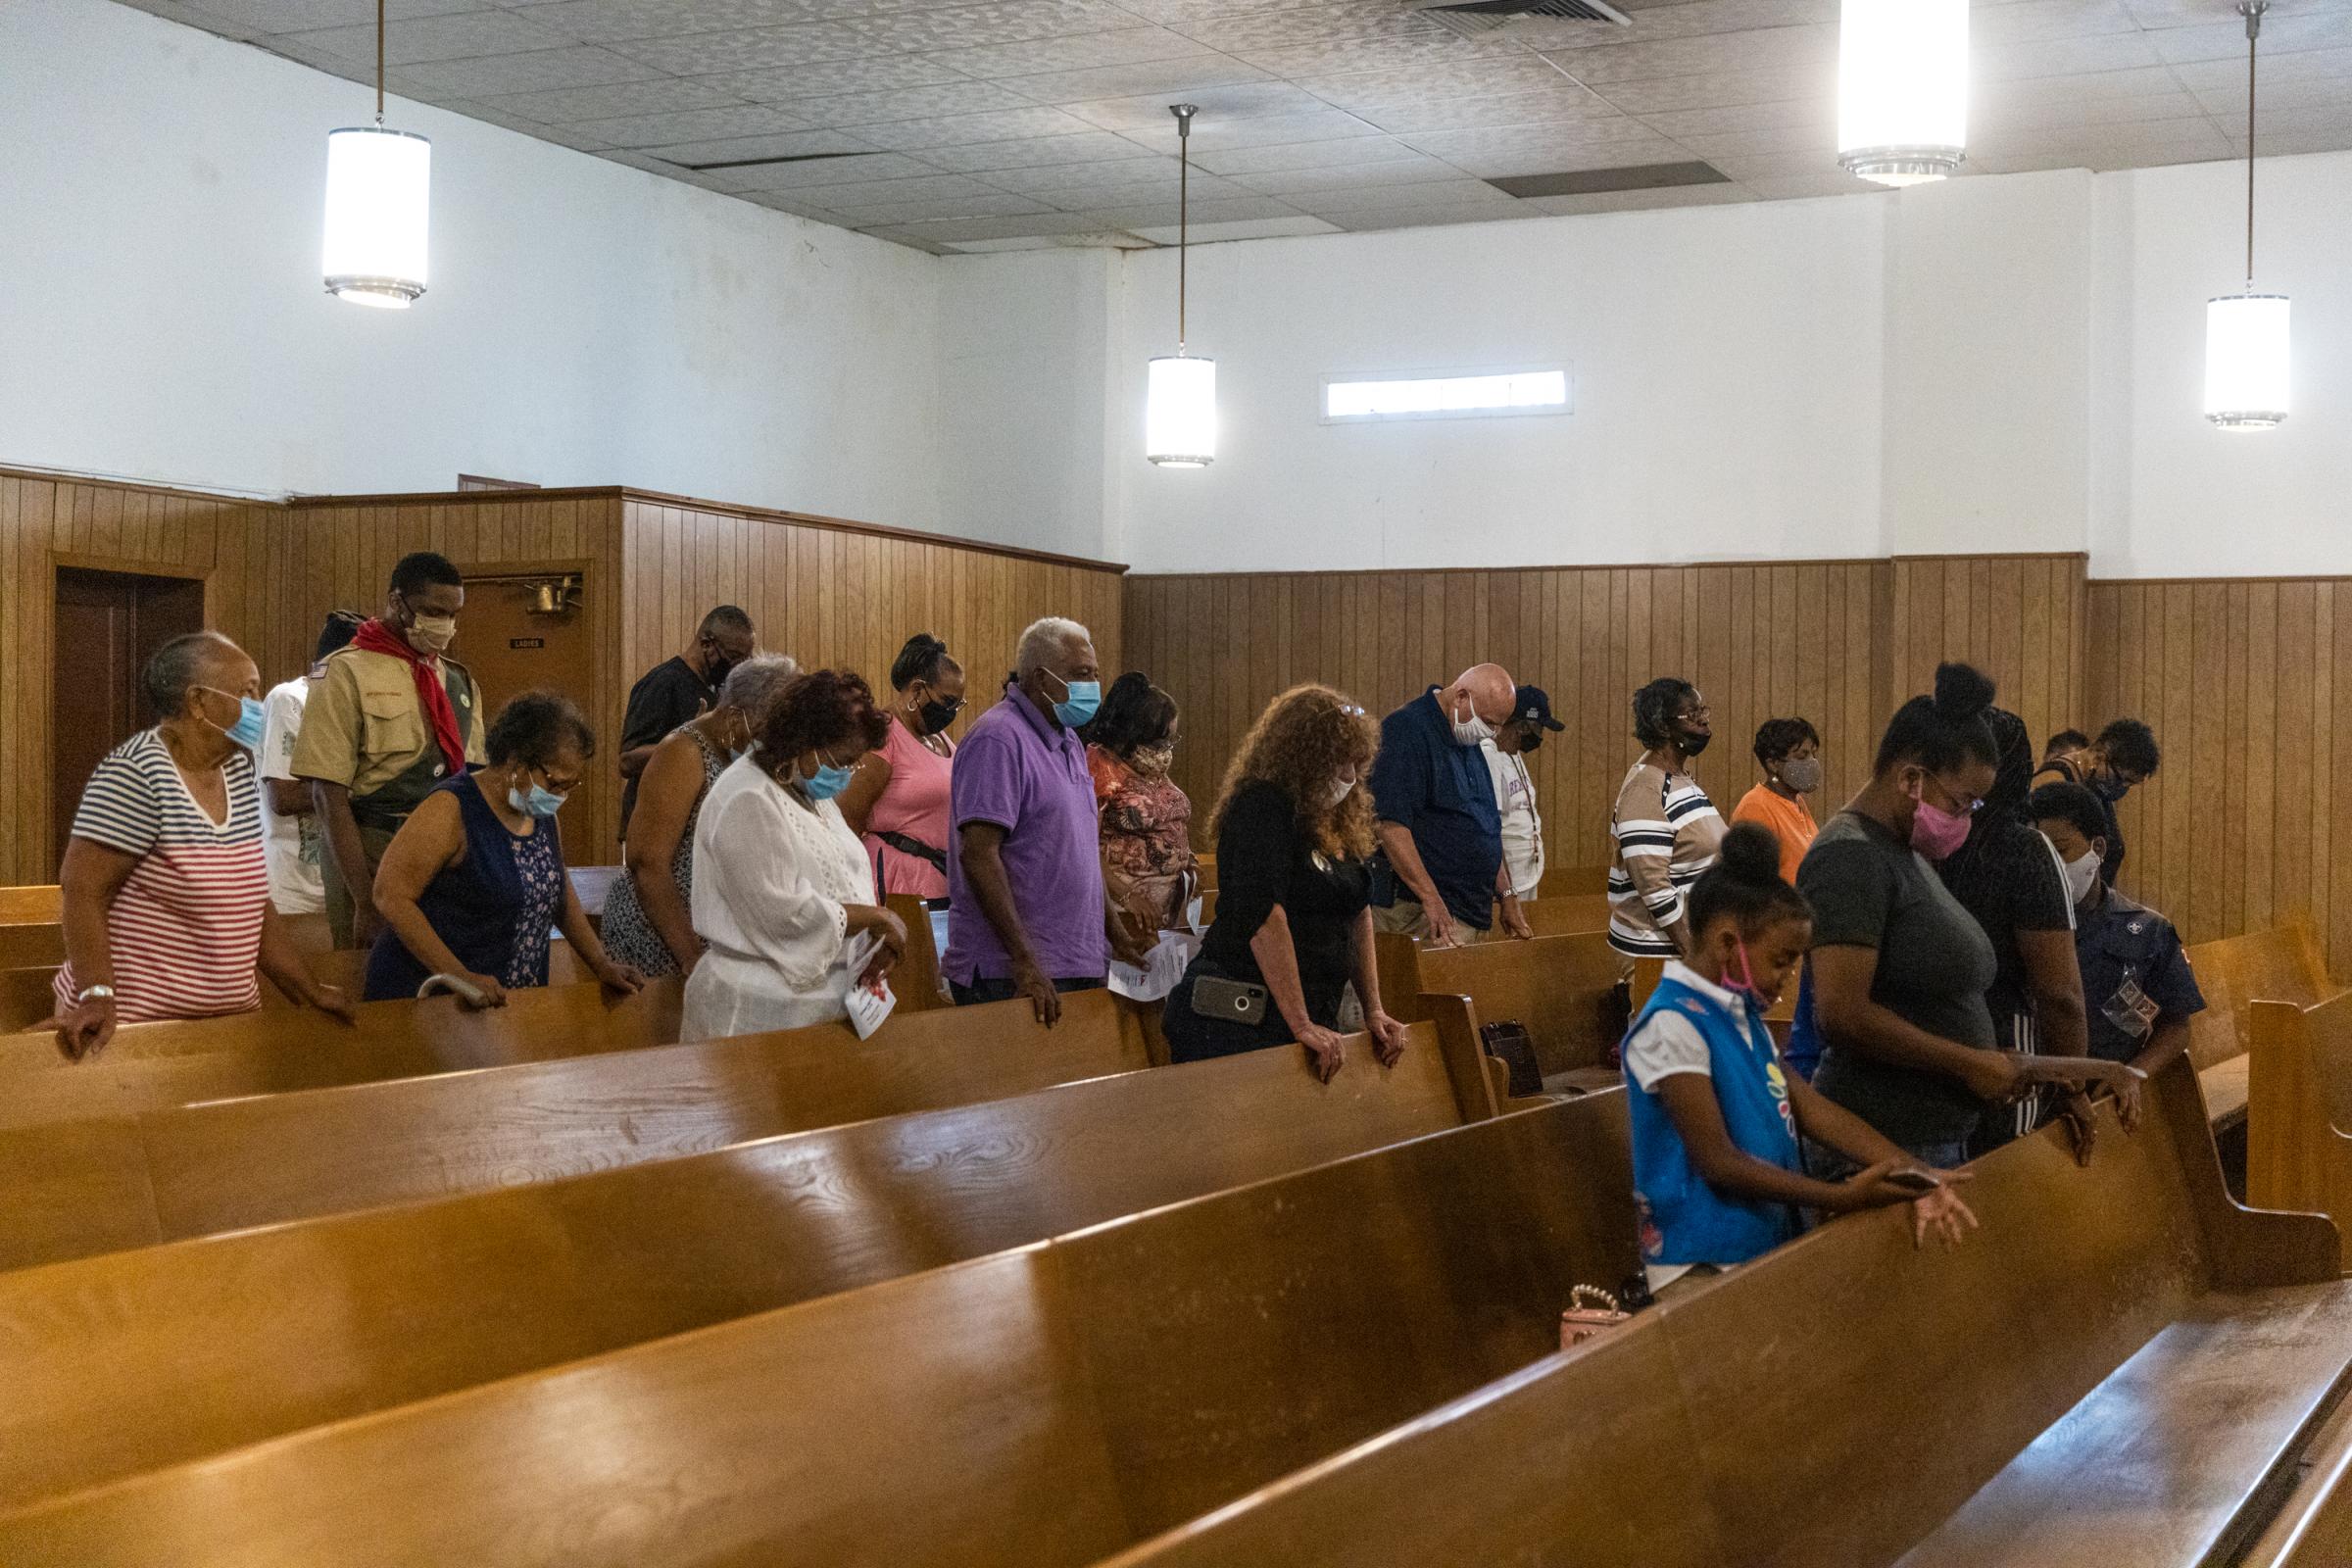 Members of the Turner Station community bow their heads in prayer during the closing ceremony of the 23rd annual Turner Station Heritage Praise Day &ldquo;Cell-A-Bration&rdquo; on August 7, 2021.